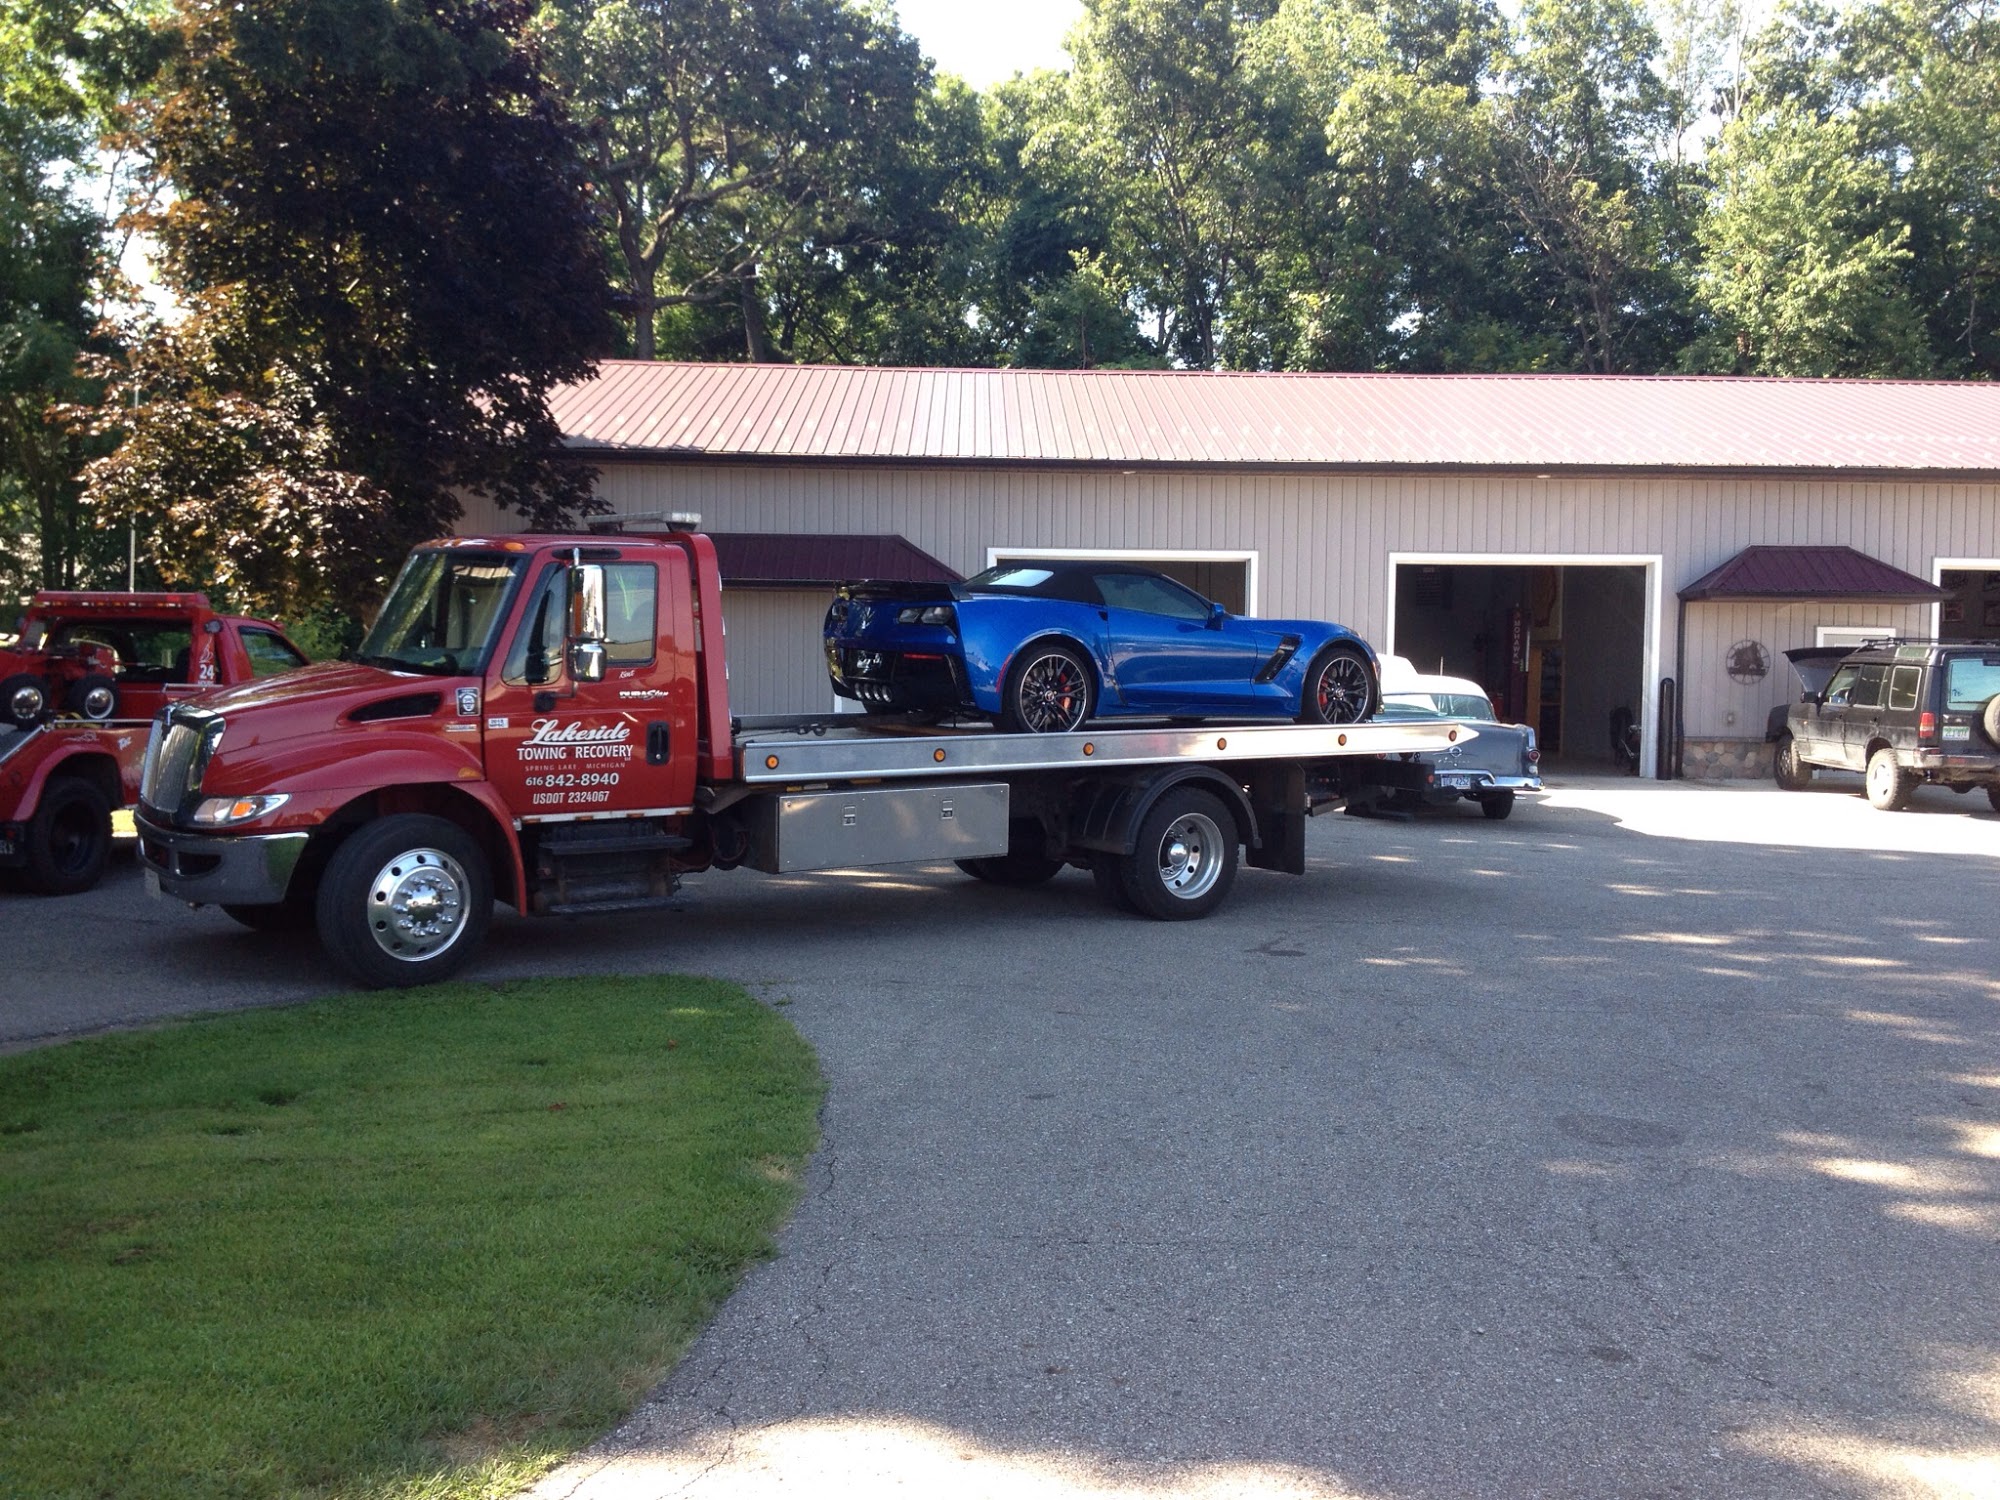 Lakeside Towing & Recovery